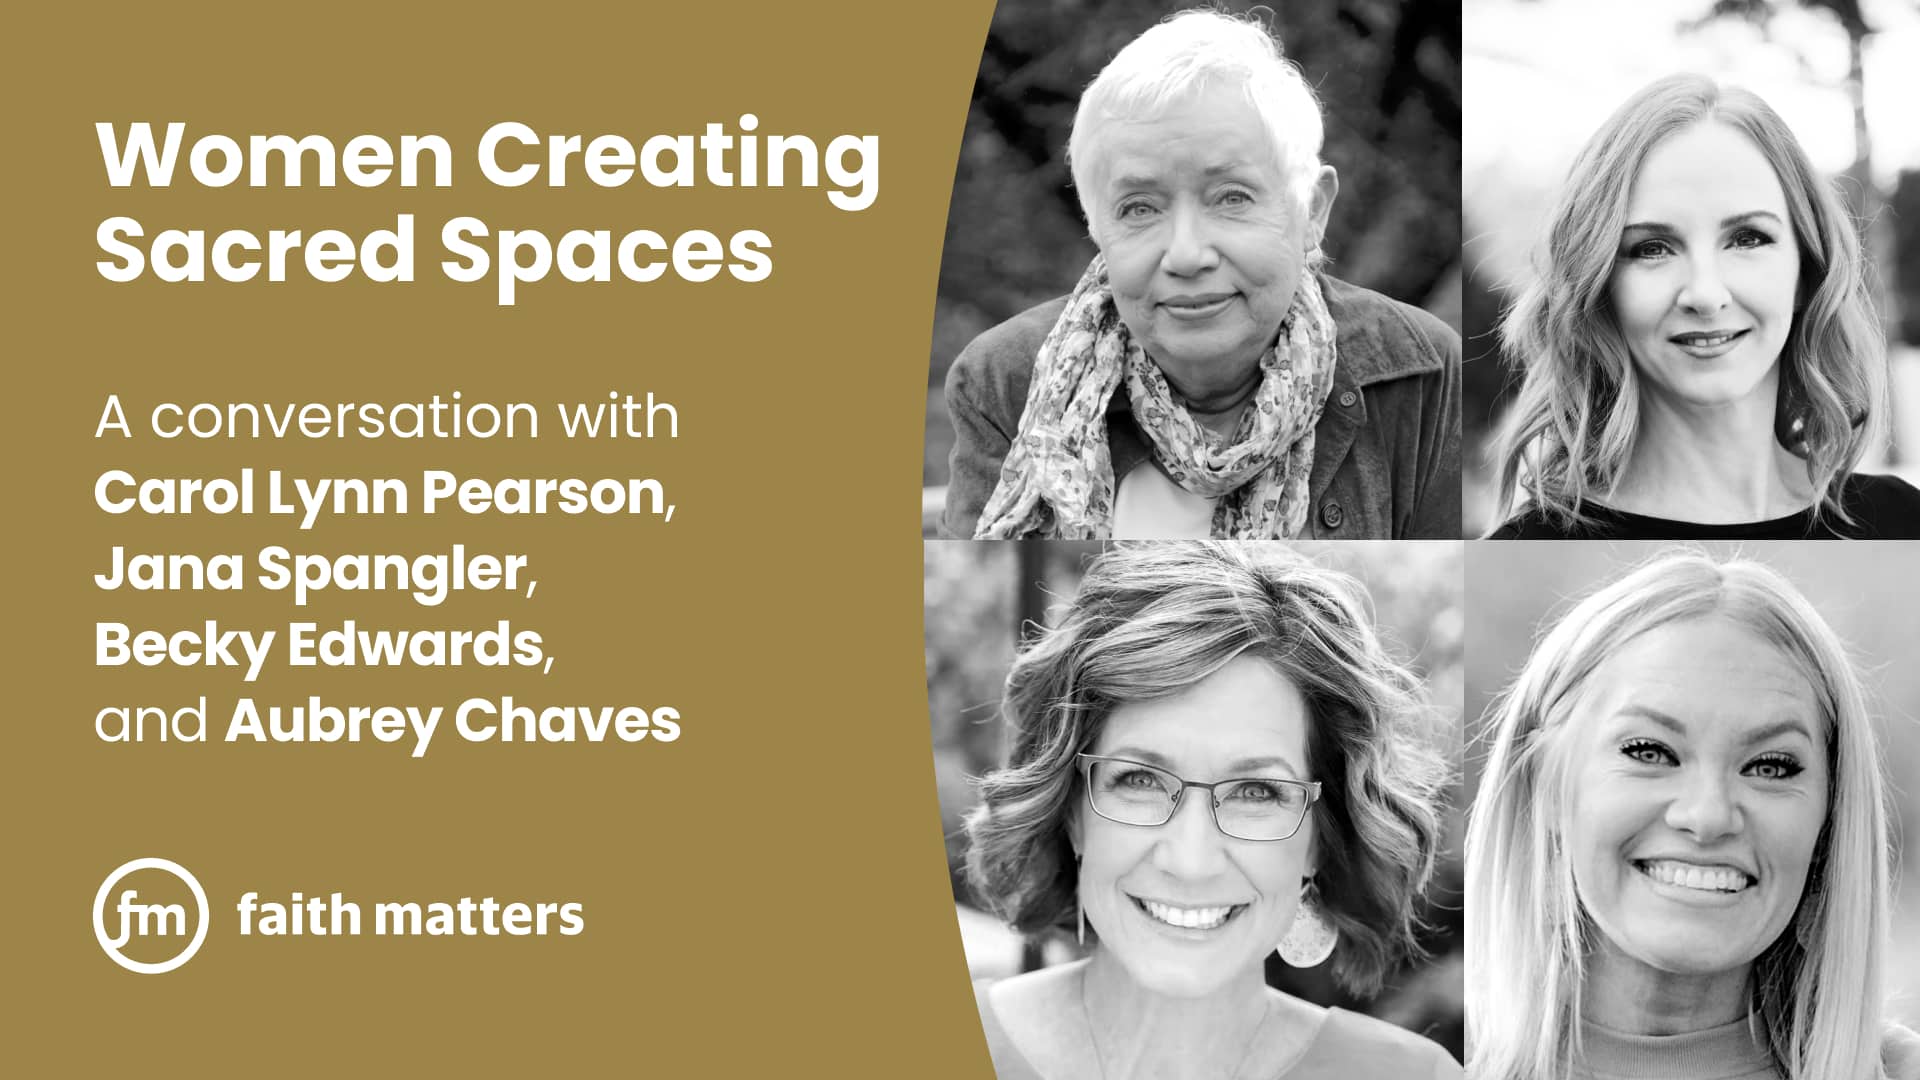 Women Creating Sacred Spaces